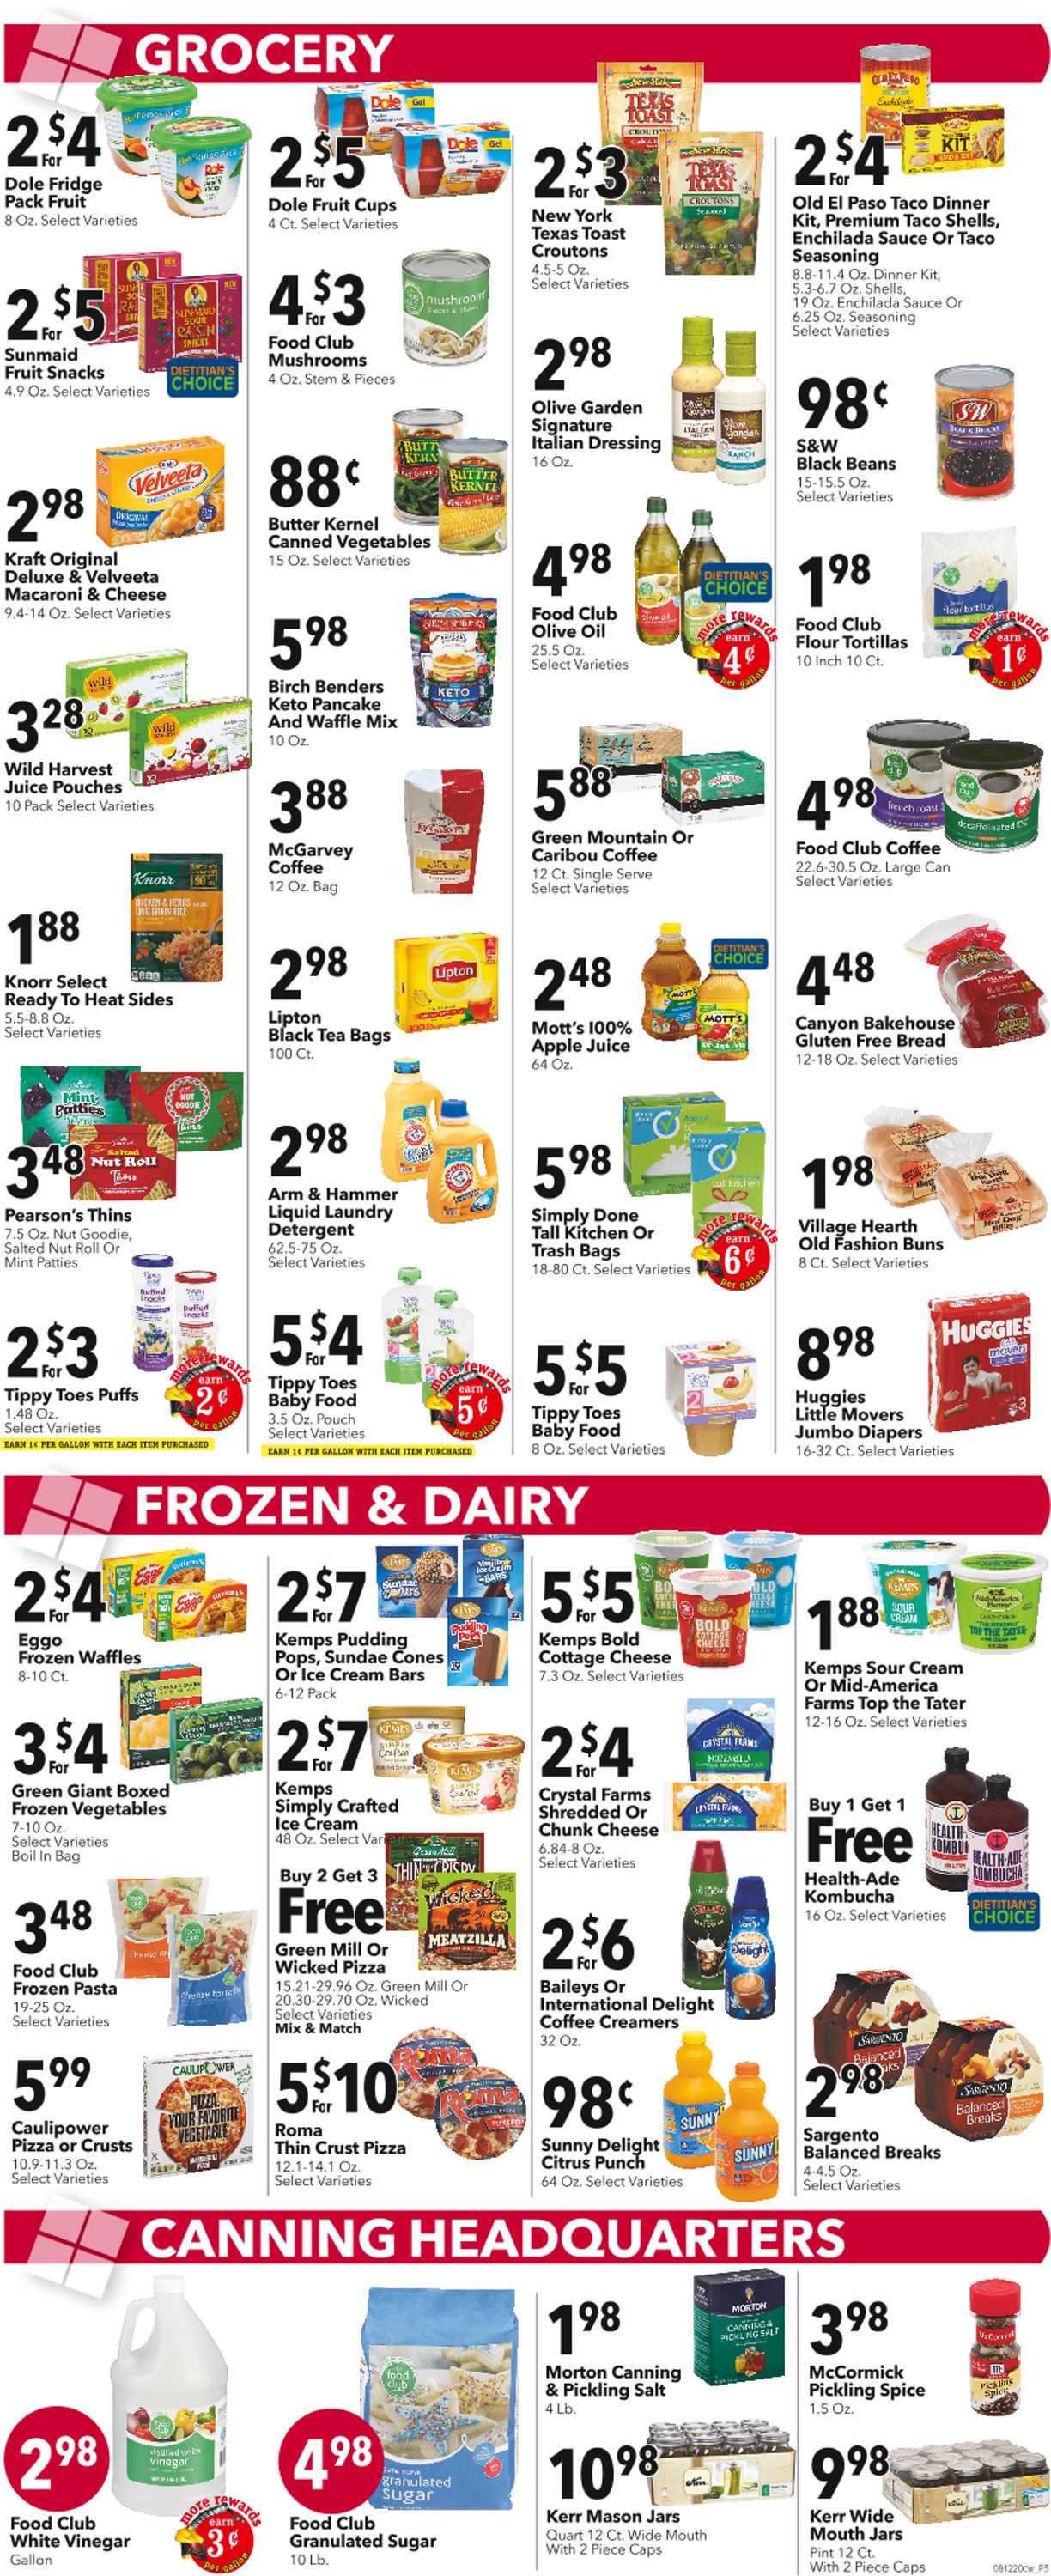 Cash Wise Weekly Ad Circular - valid 08/12-08/18/2020 (Page 3)